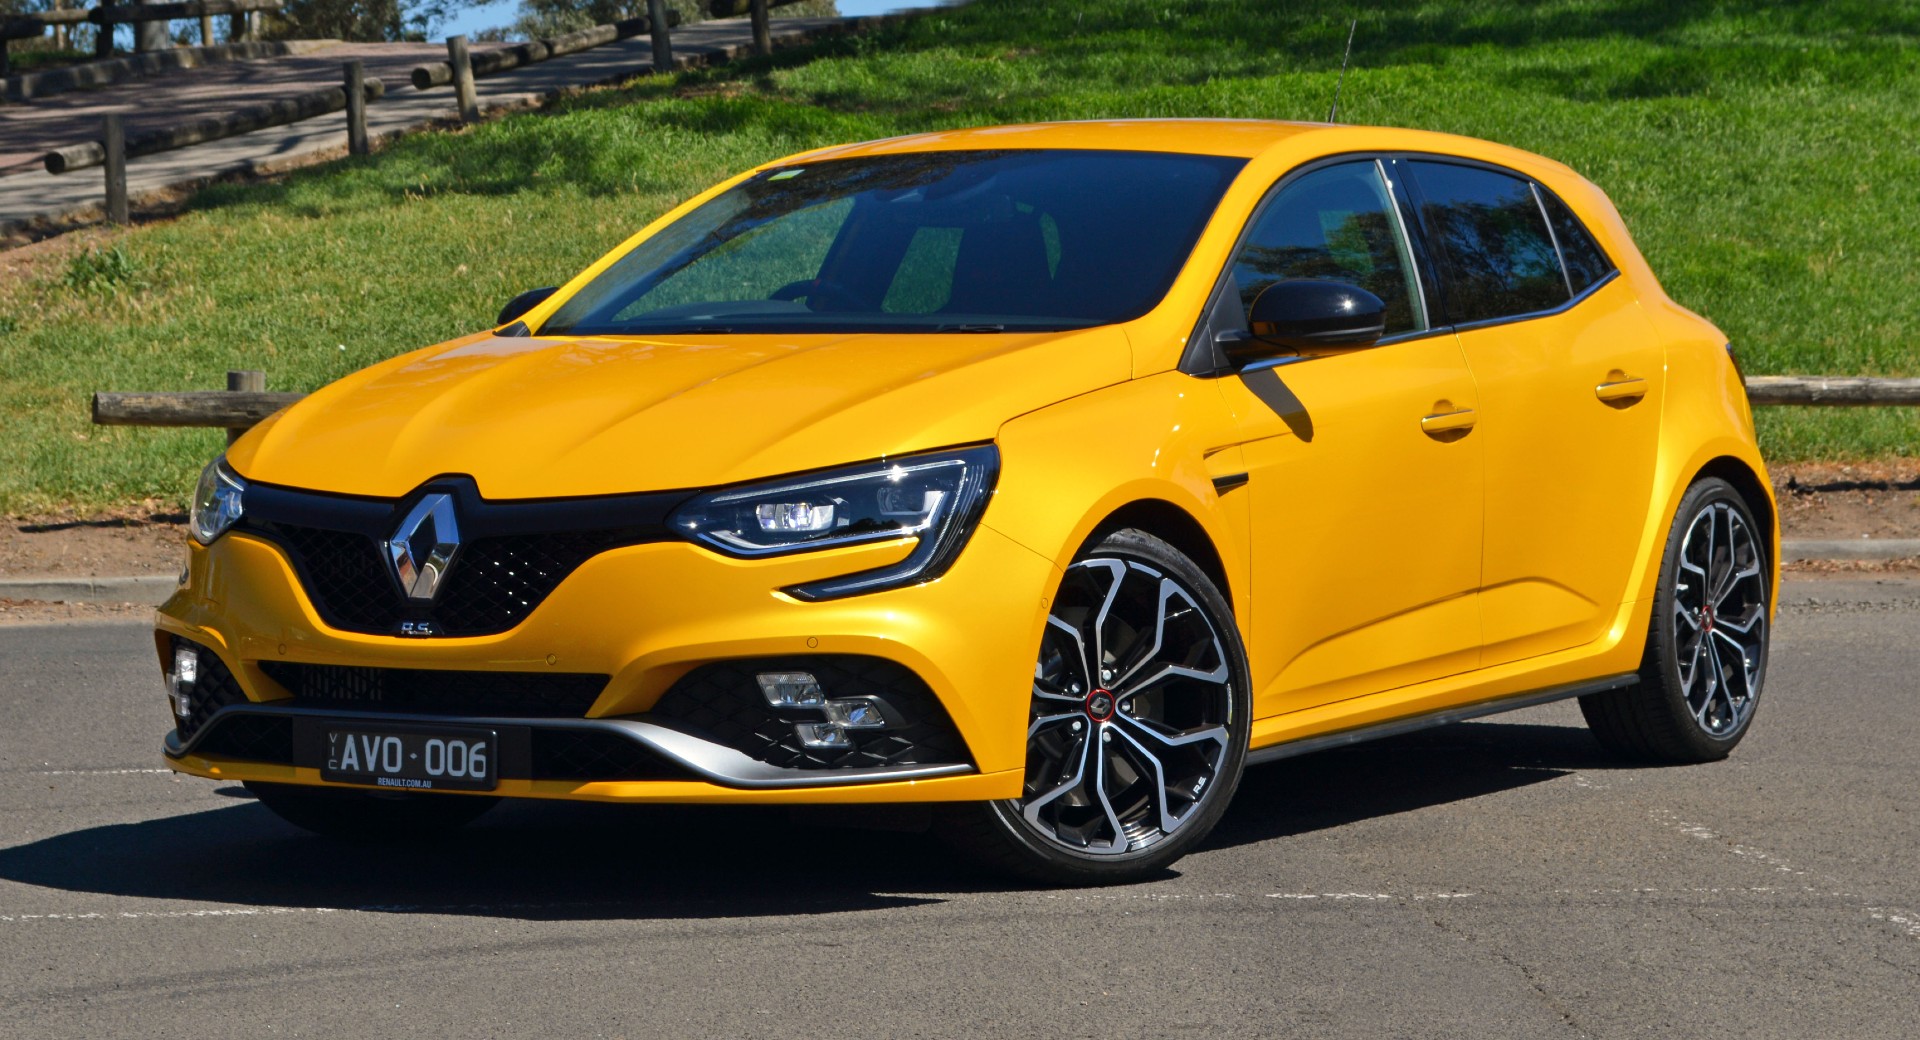 Renault Megane Reportedly Ends Production After 27 Years And Four